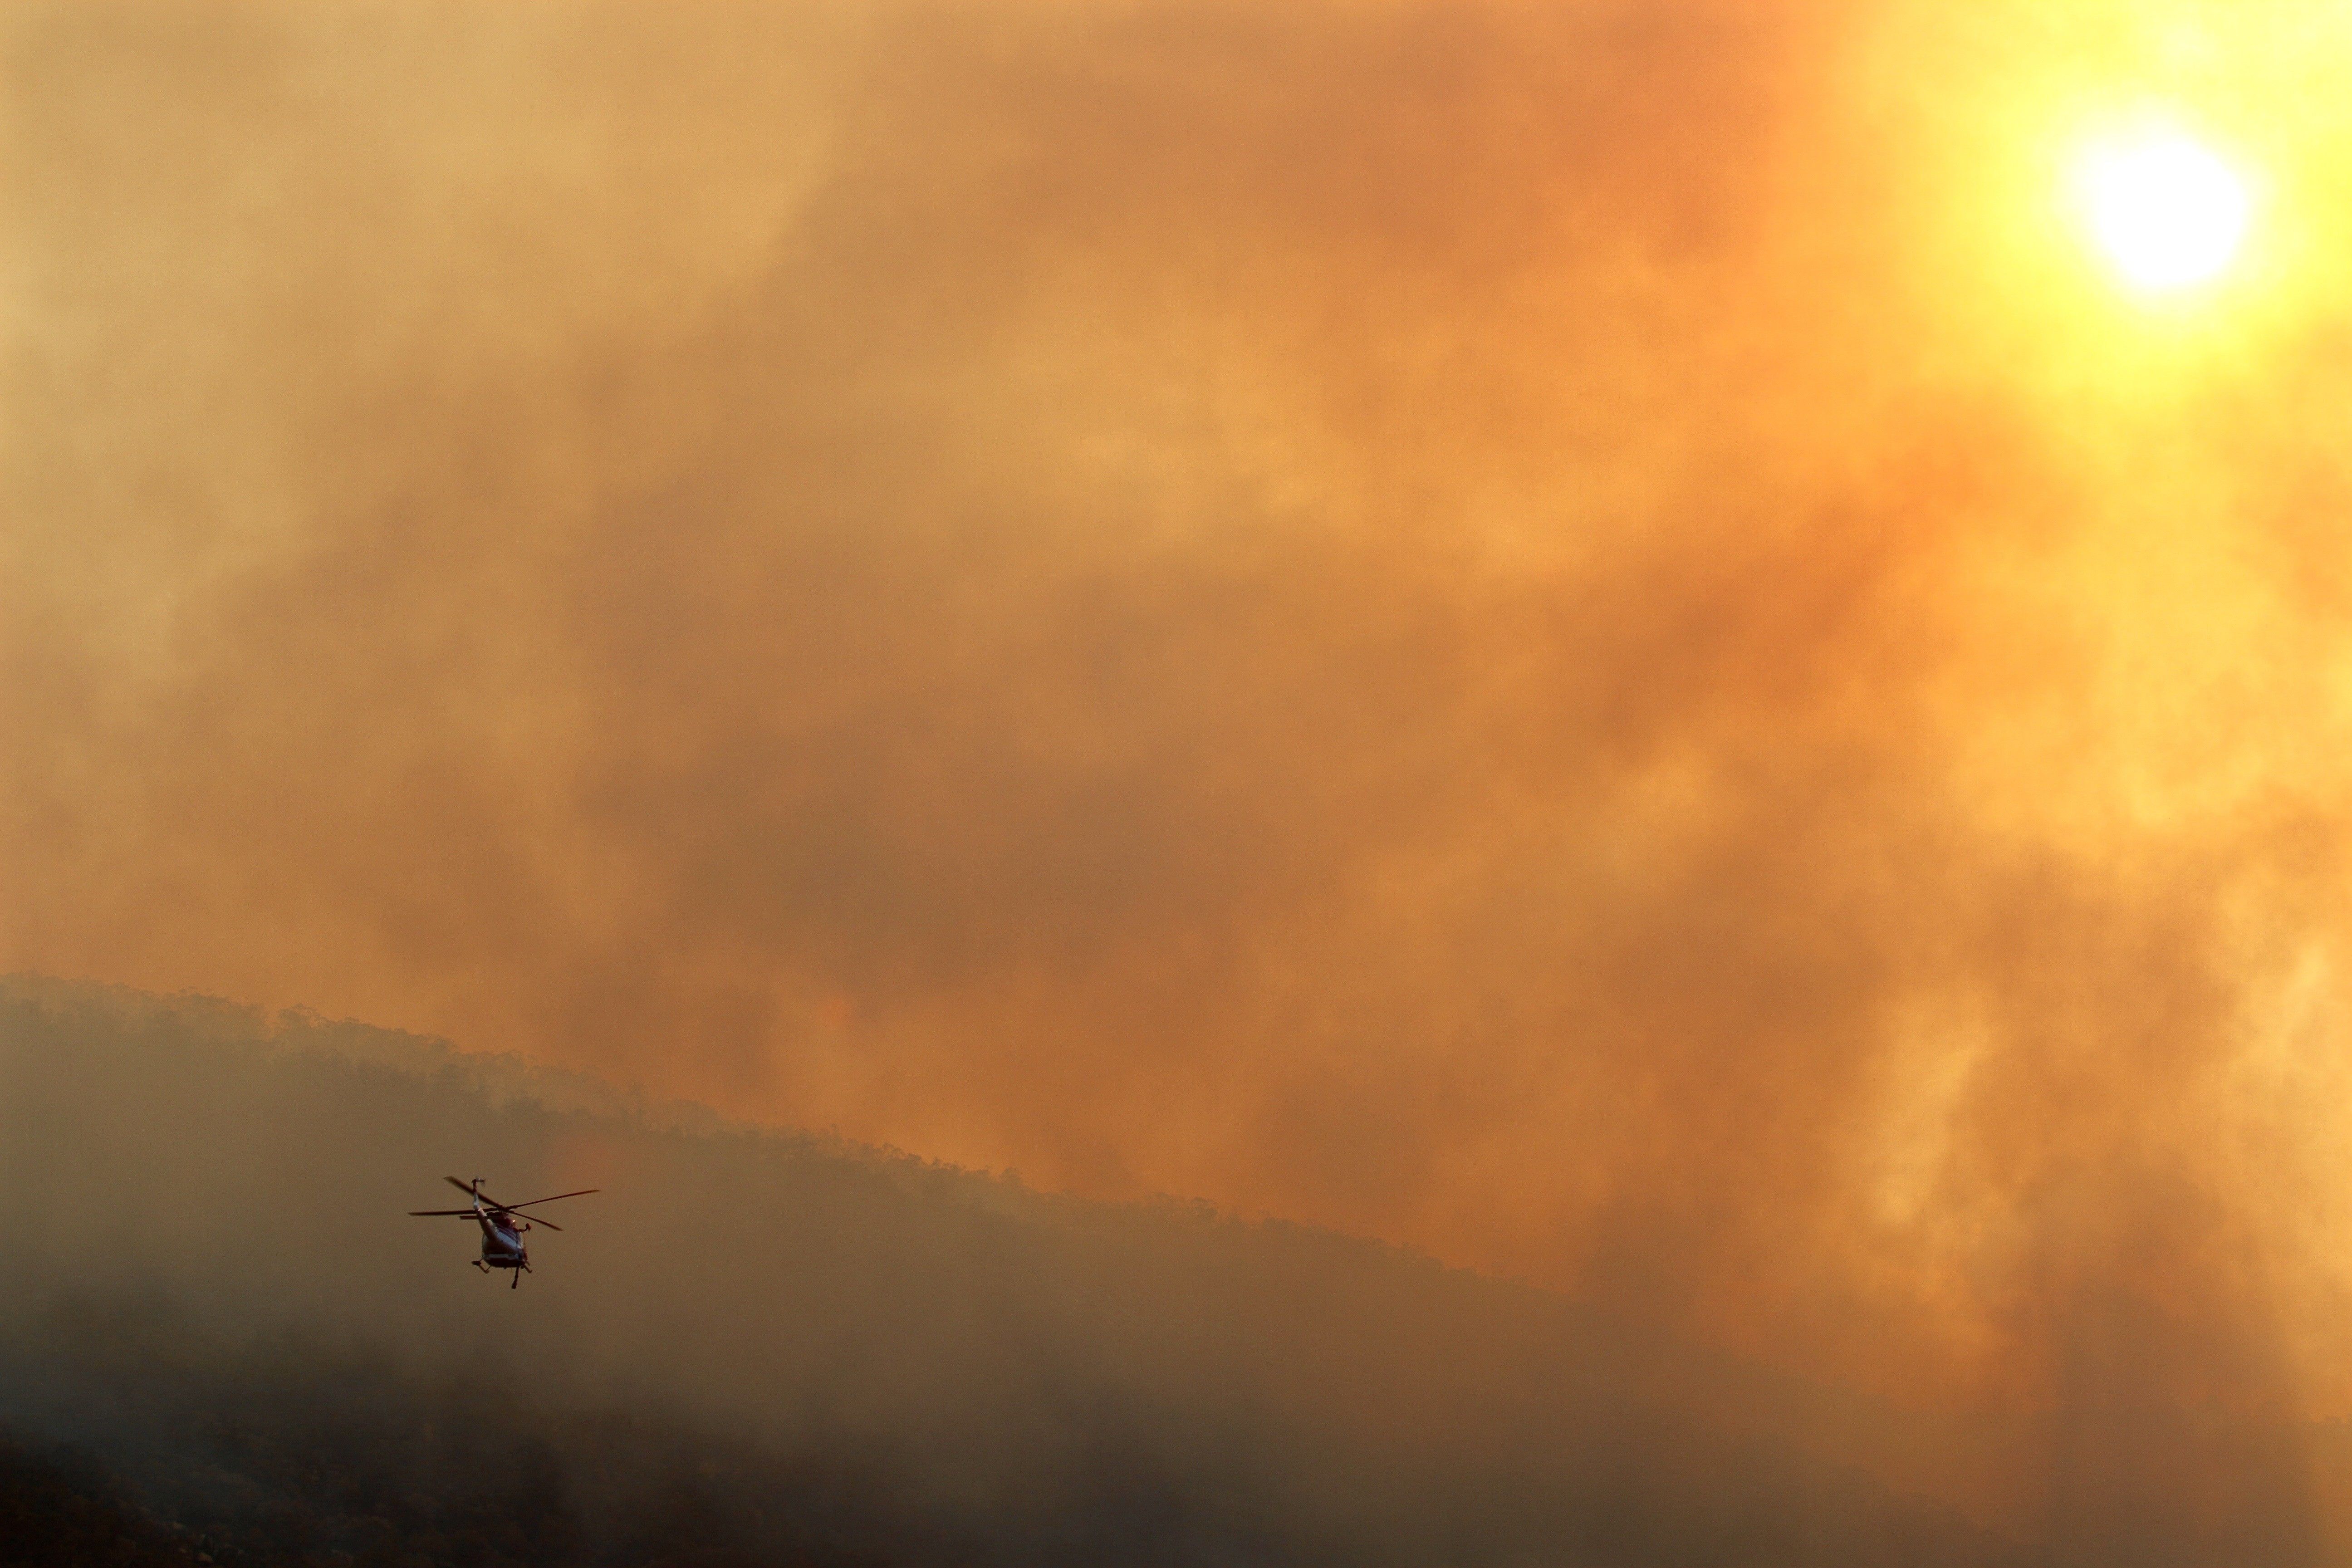 Orroral Valley fire inquiry to likely focus on Army helicopter's operation and actions of its crew